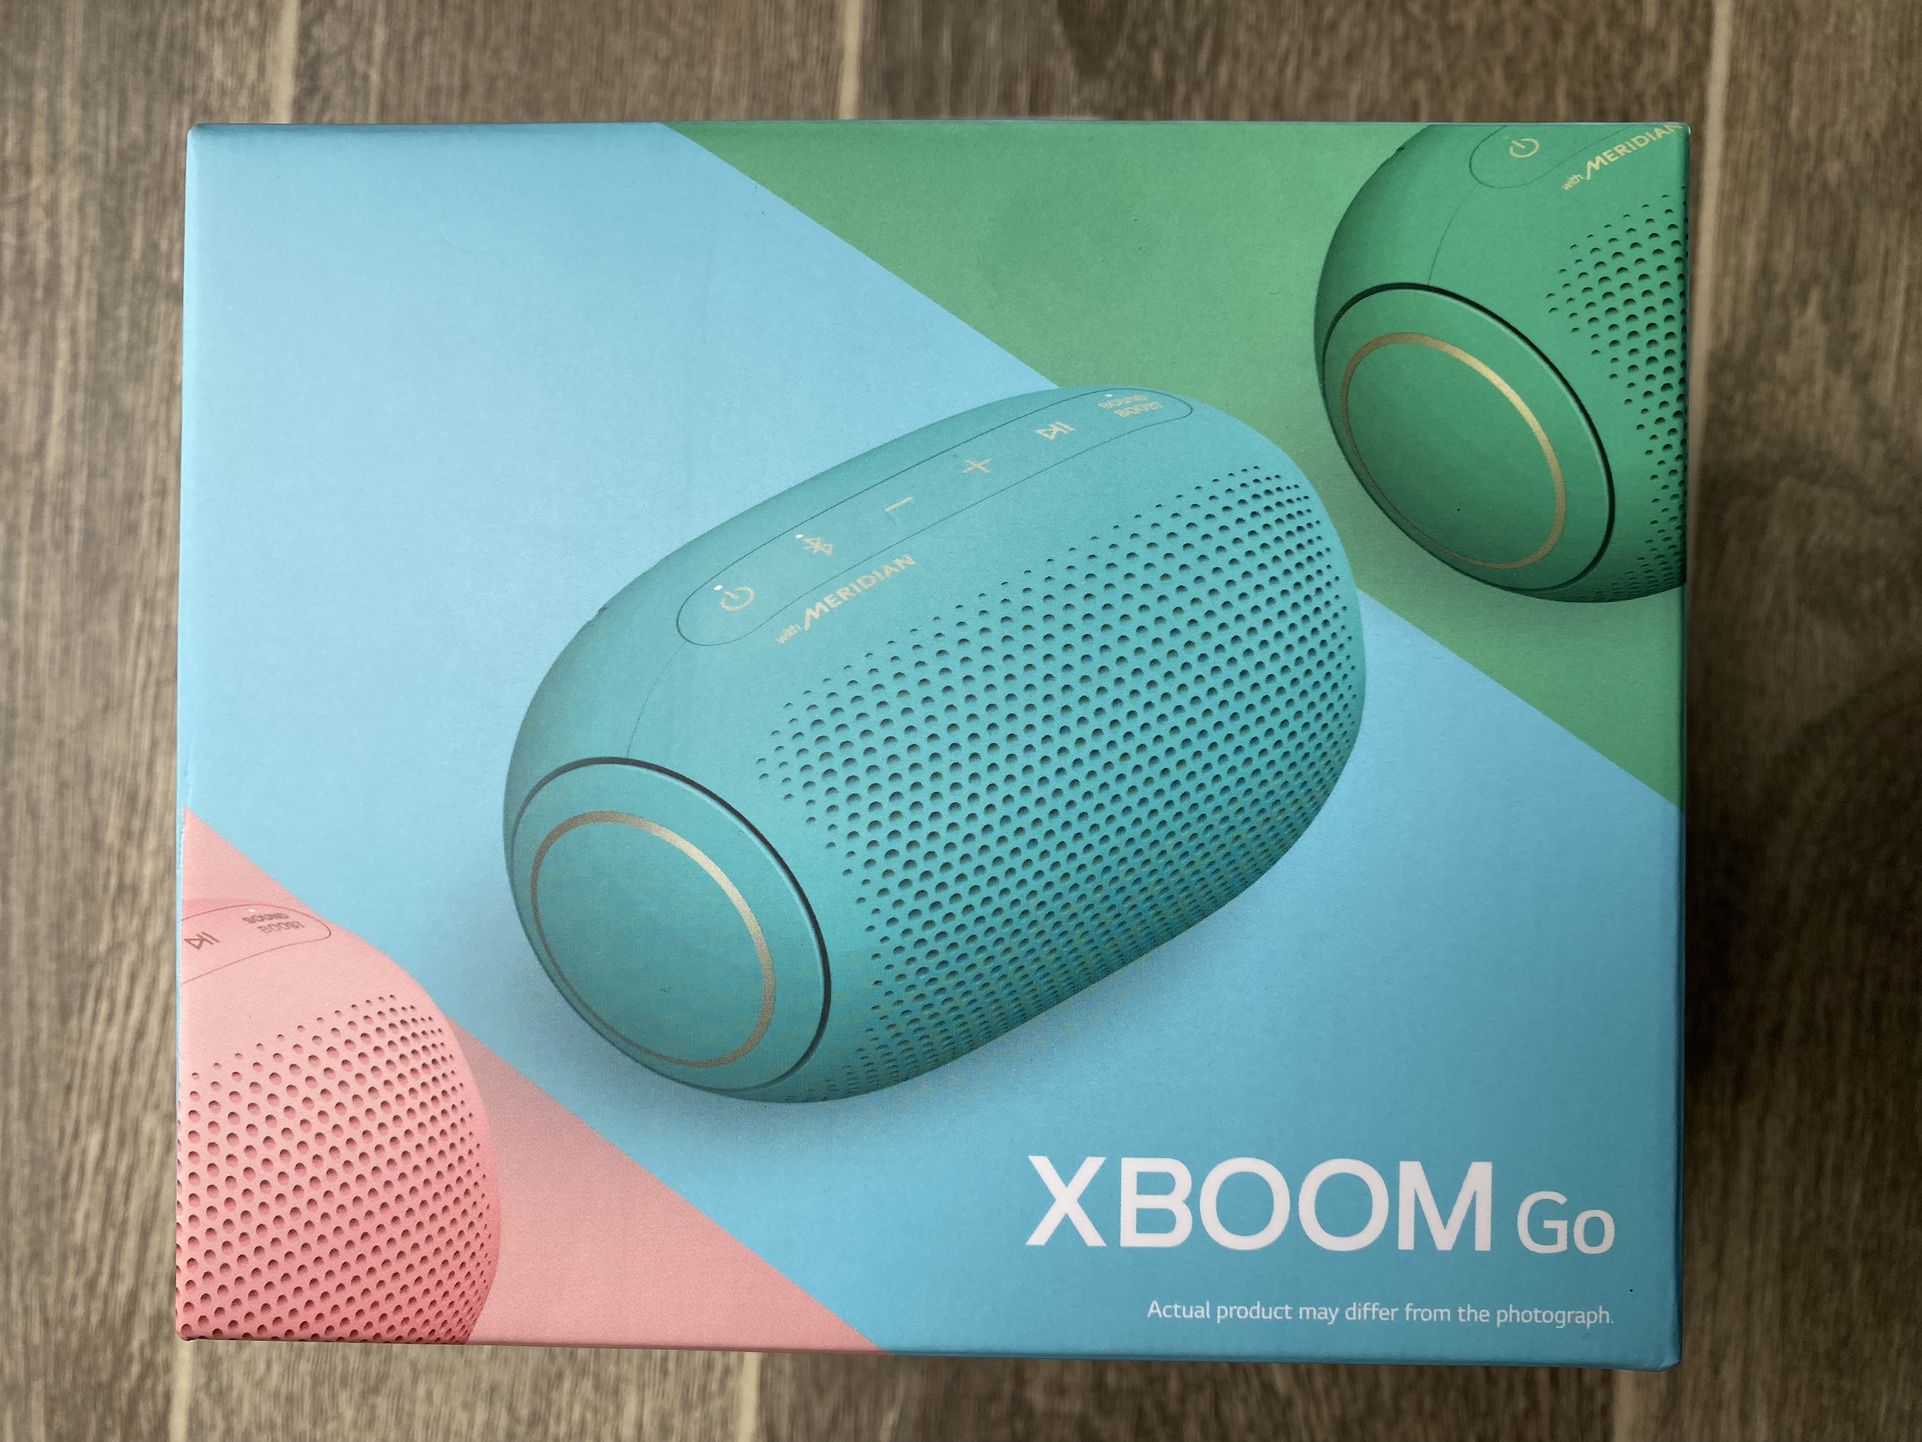 New In Sealed Box! LG XBOOM Portable Water Resistant Bluetooth Speaker